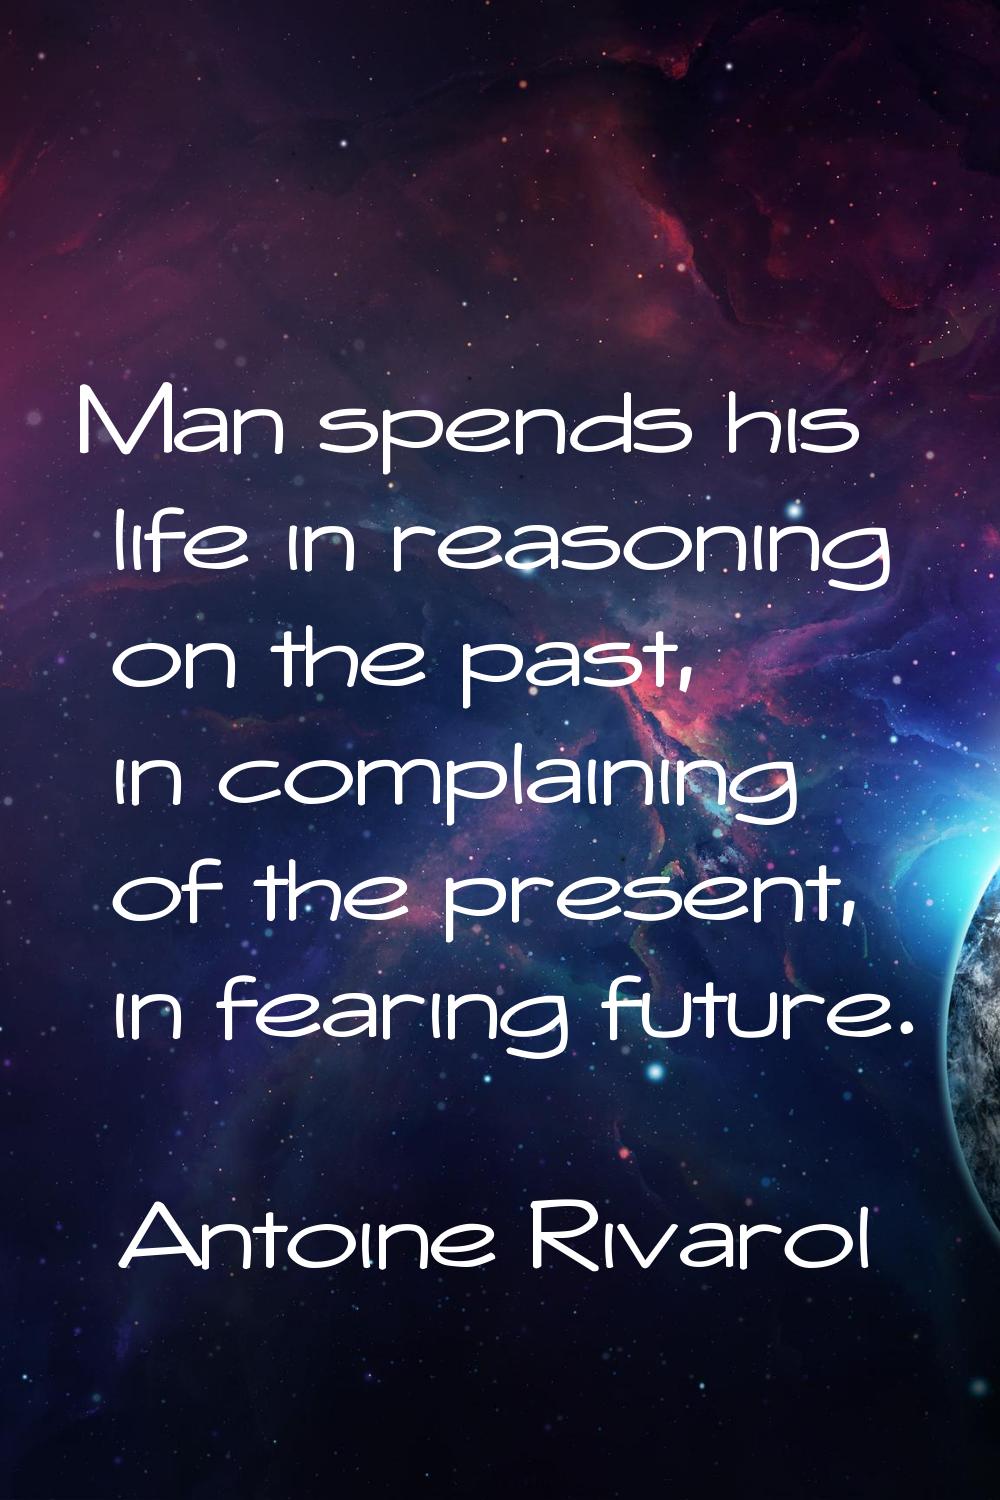 Man spends his life in reasoning on the past, in complaining of the present, in fearing future.